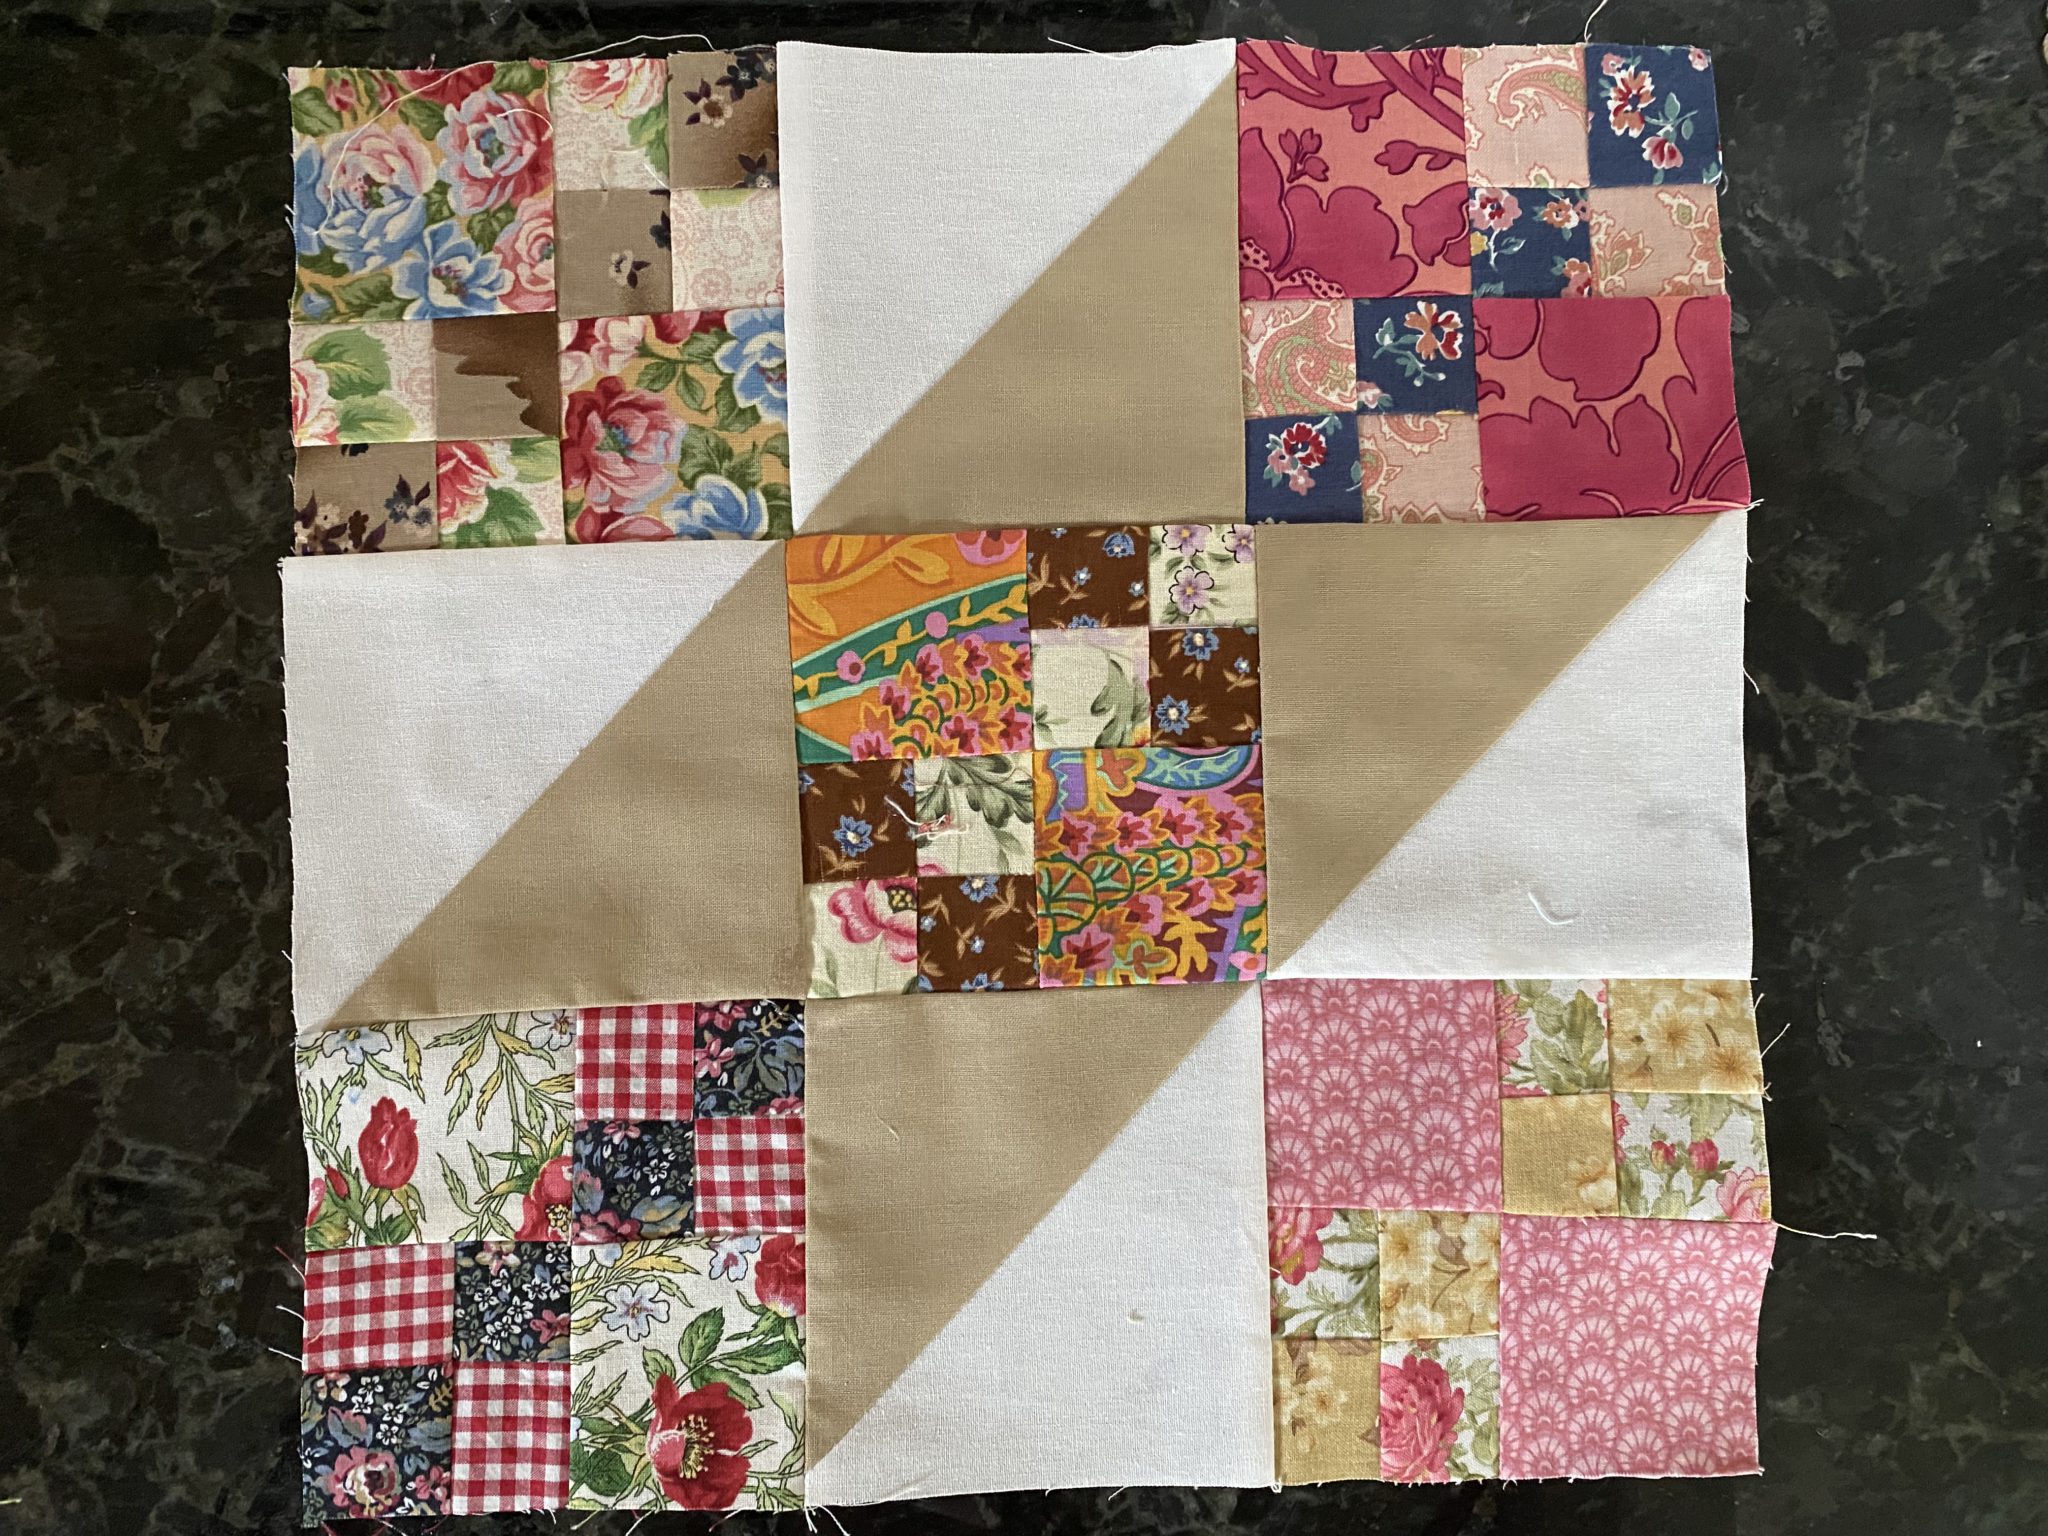 New Scrappy Double Four In Nine Patch Jacobs Ladder Quilt Block Variation susies—scraps.com